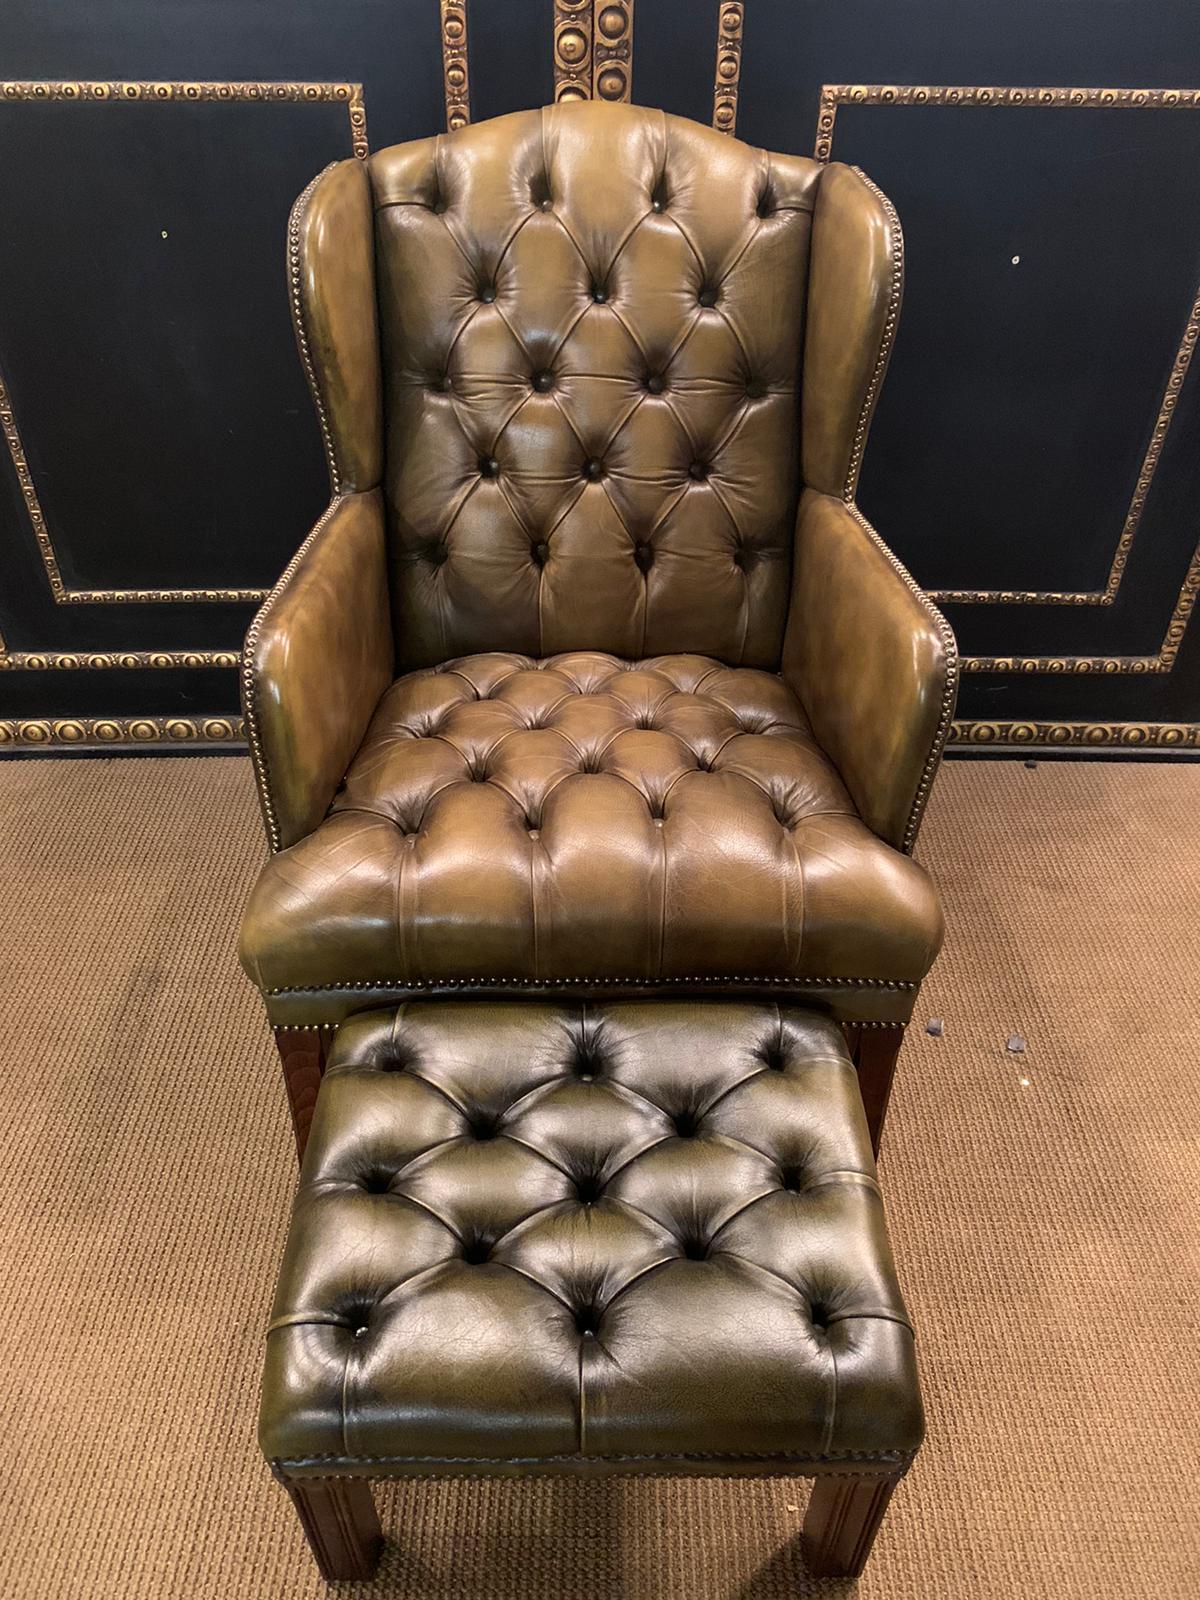 We are delighted to offer for sale this lovely vintage Georgian H-framed Chesterfield wingback armchair and footstool in green leather A lovely pair, full of vintage charm and character, we have lightly restored them to include a deep cleaned hand